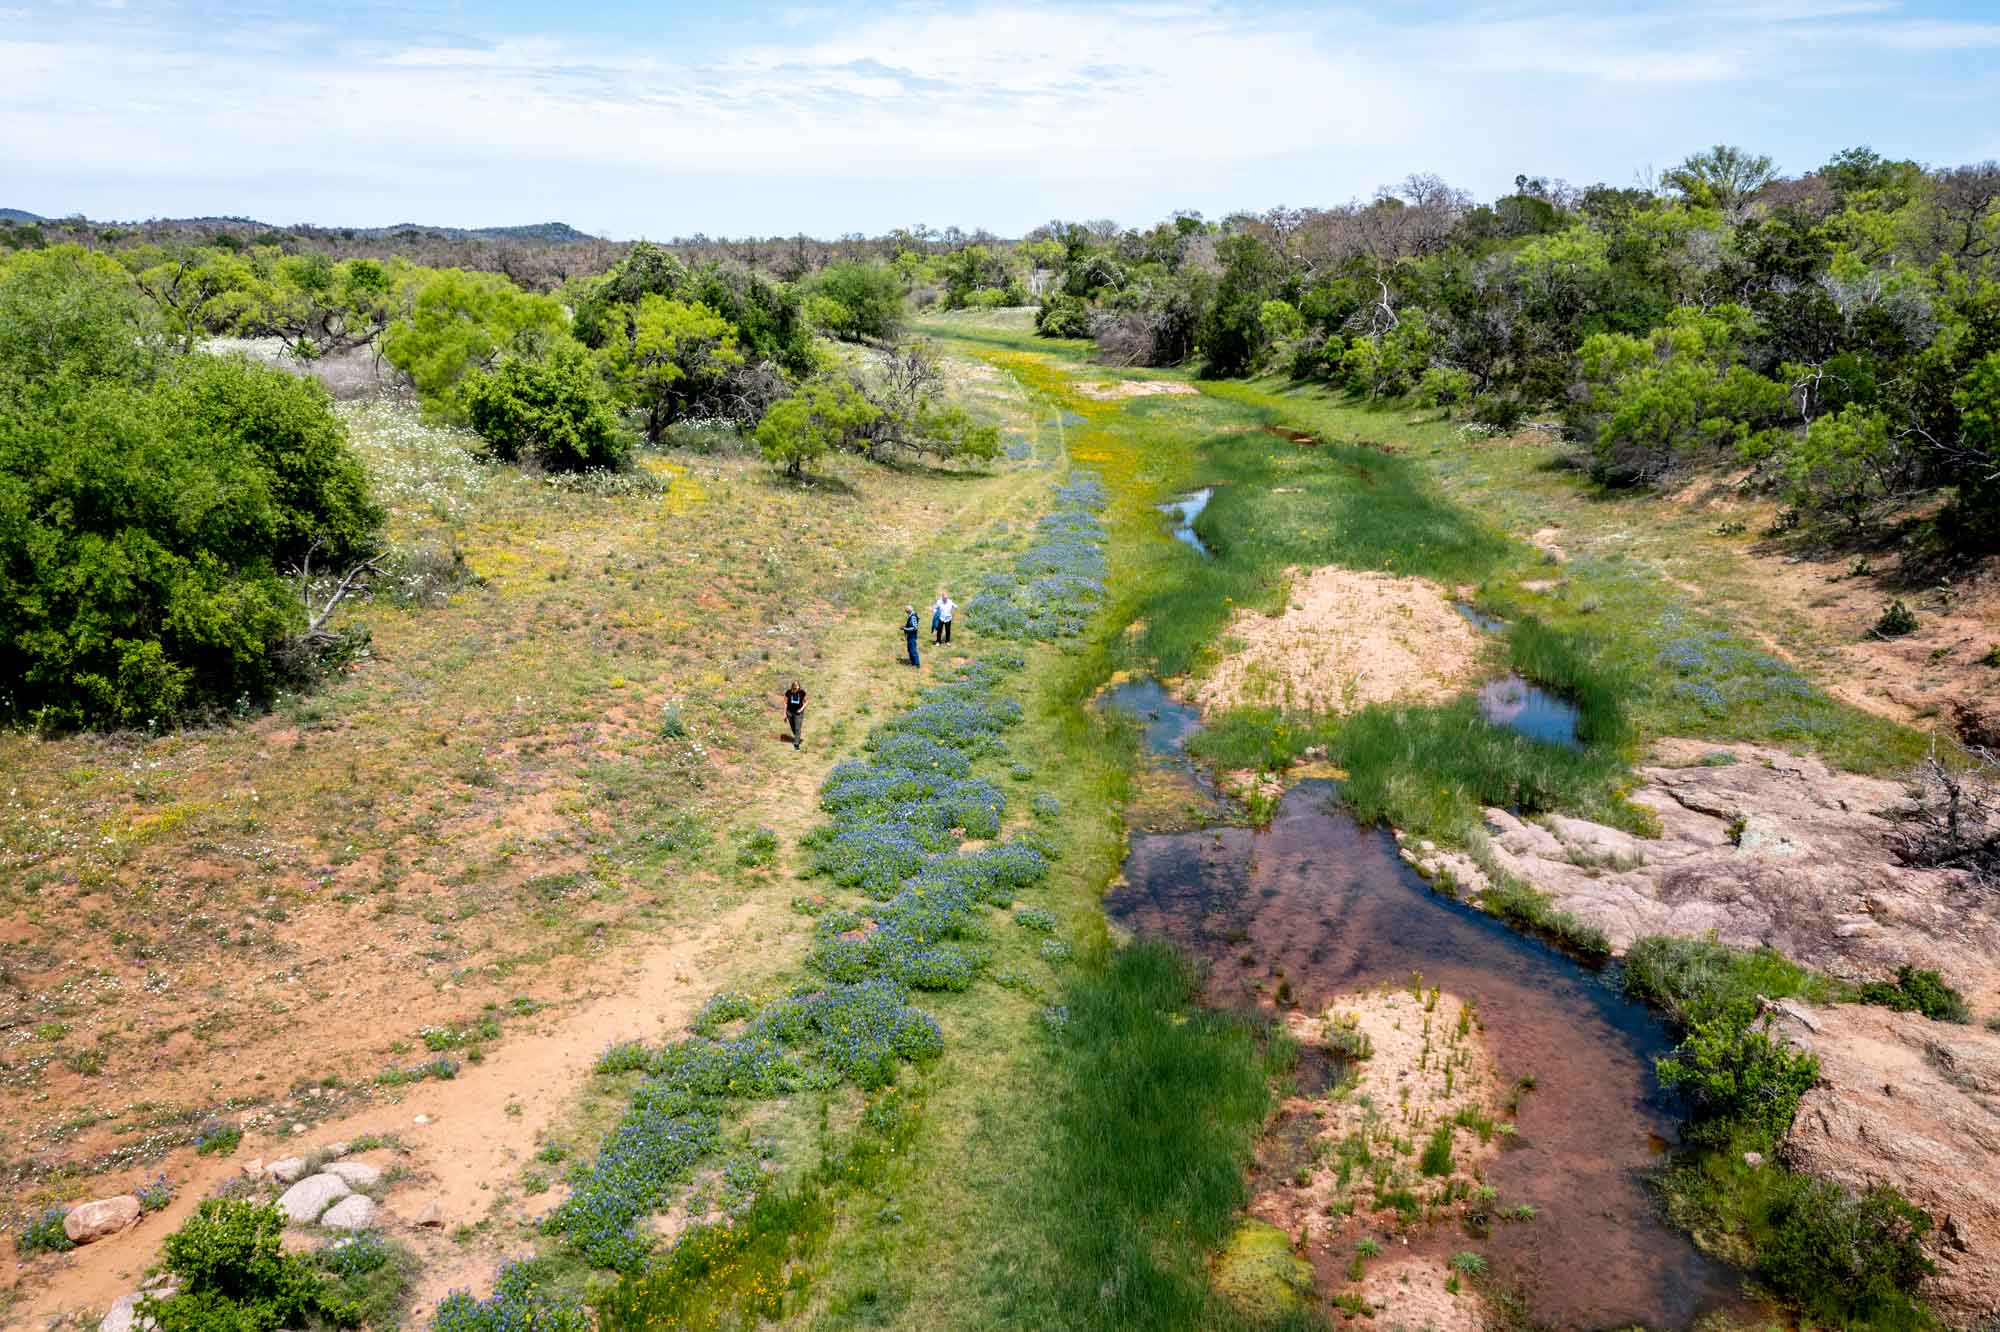 People walking in a nearly dry streambed